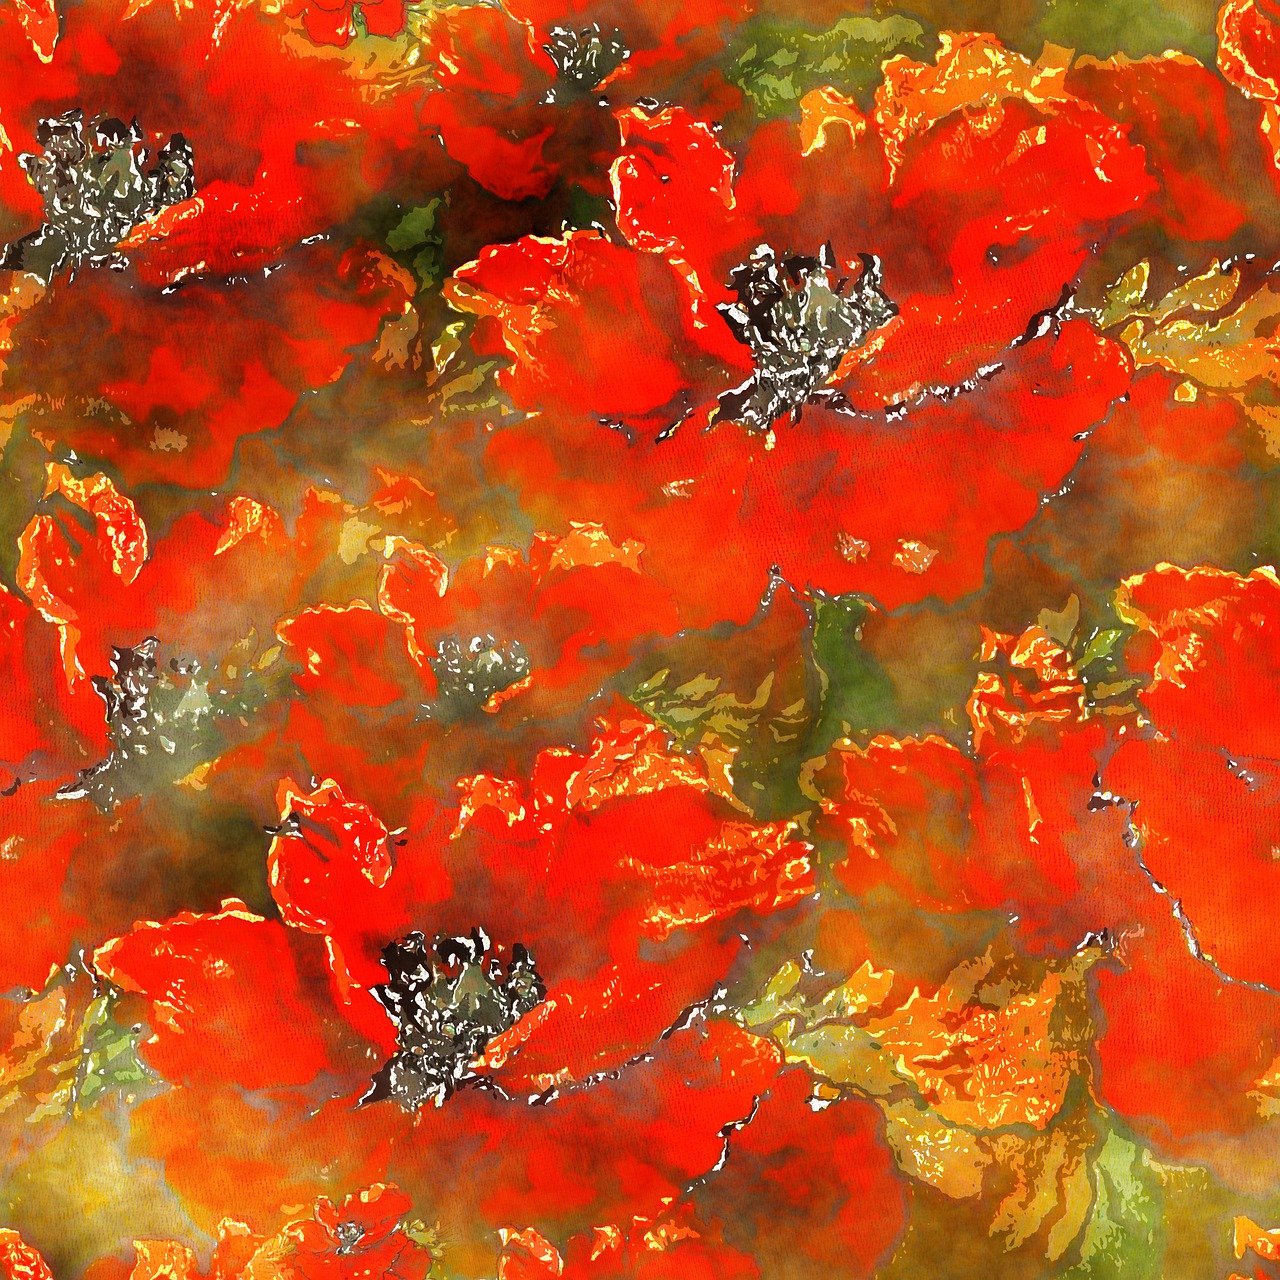 Artistic field of poppies form a background